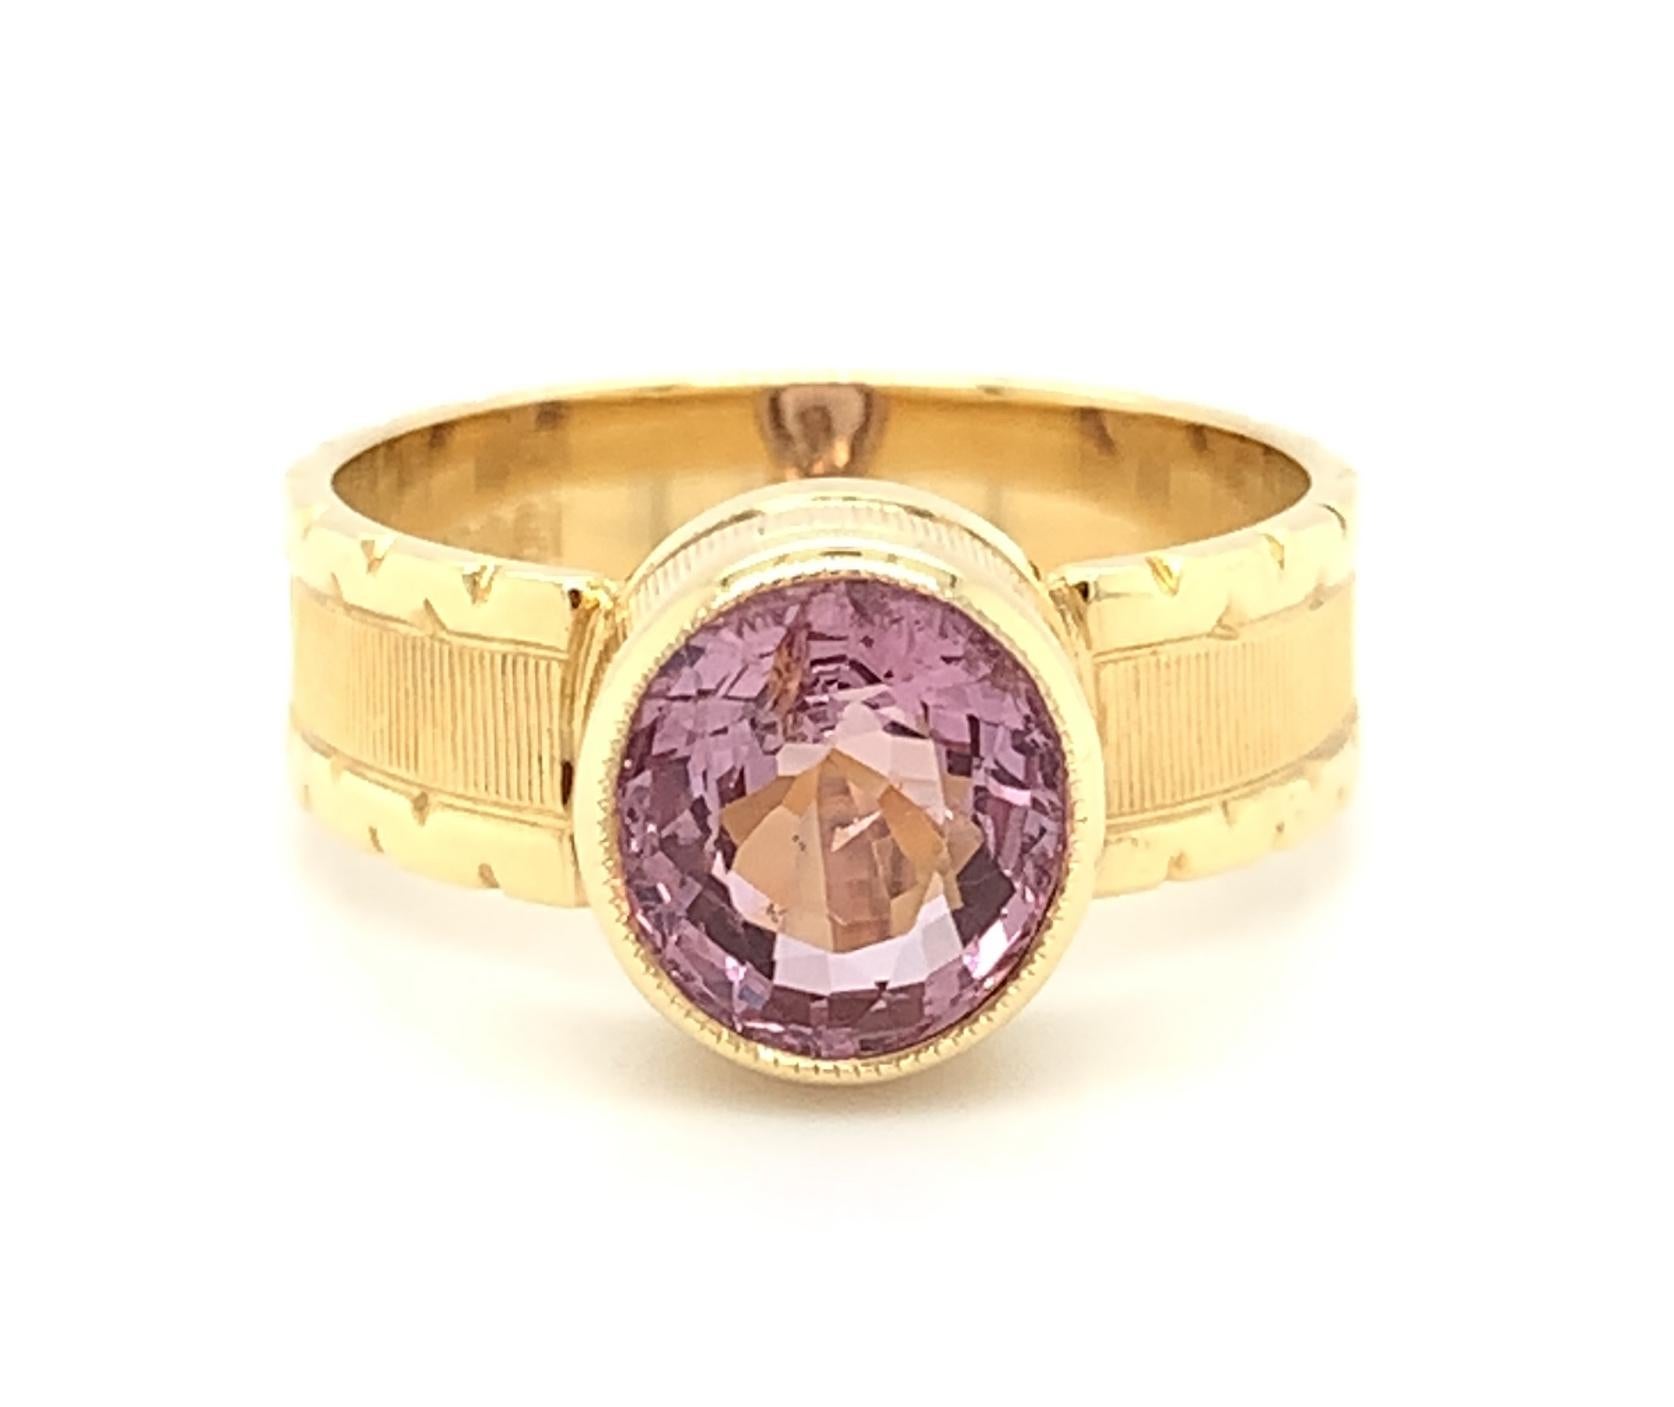 A sparkling, 2.03 carat rose pink spinel is highlighted in this beautifully handmade 18k yellow gold band ring. Intricate details have been added to every angle of this masterfully created ring, from the top and sides of the bezel to the sides of